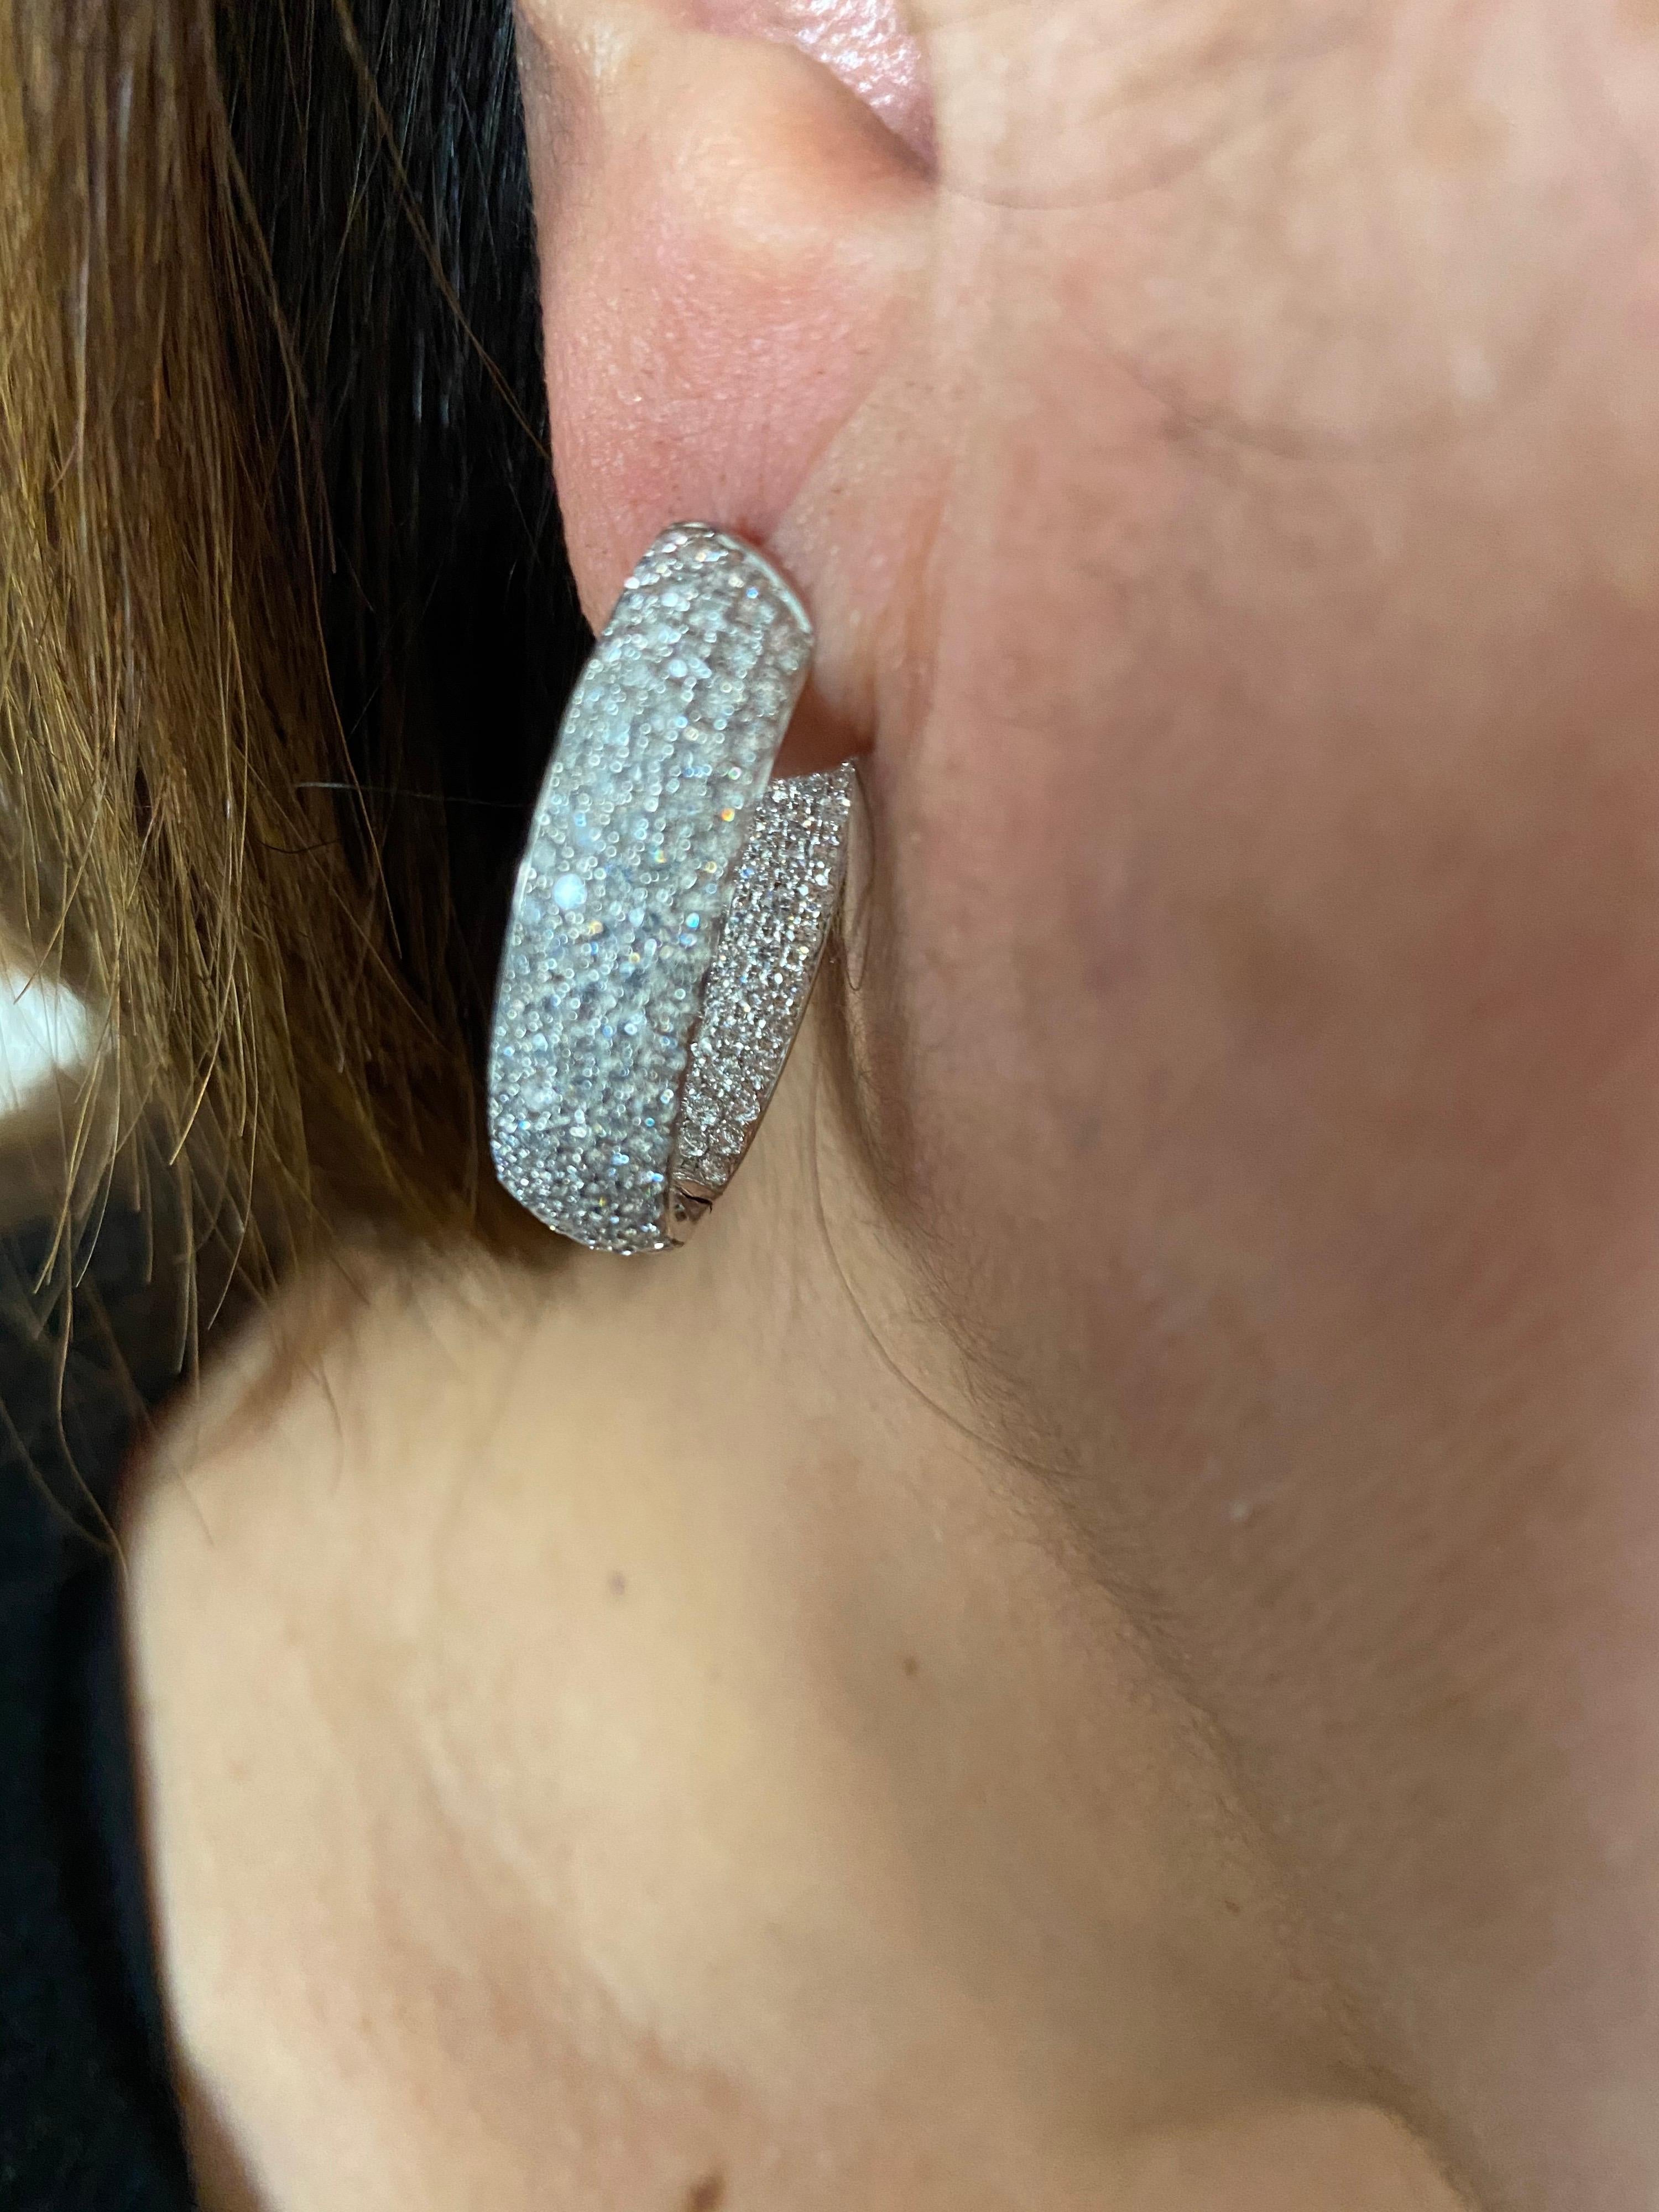 Oval shaped diamond hoop earrings set in 18K white gold. The earrings are set with 5 rows of diamonds inside and out in a Pave' setting. The color of the stones are F, the clarity is VS1-VS2. The total carat weight is 5.55 carats. The earrings are